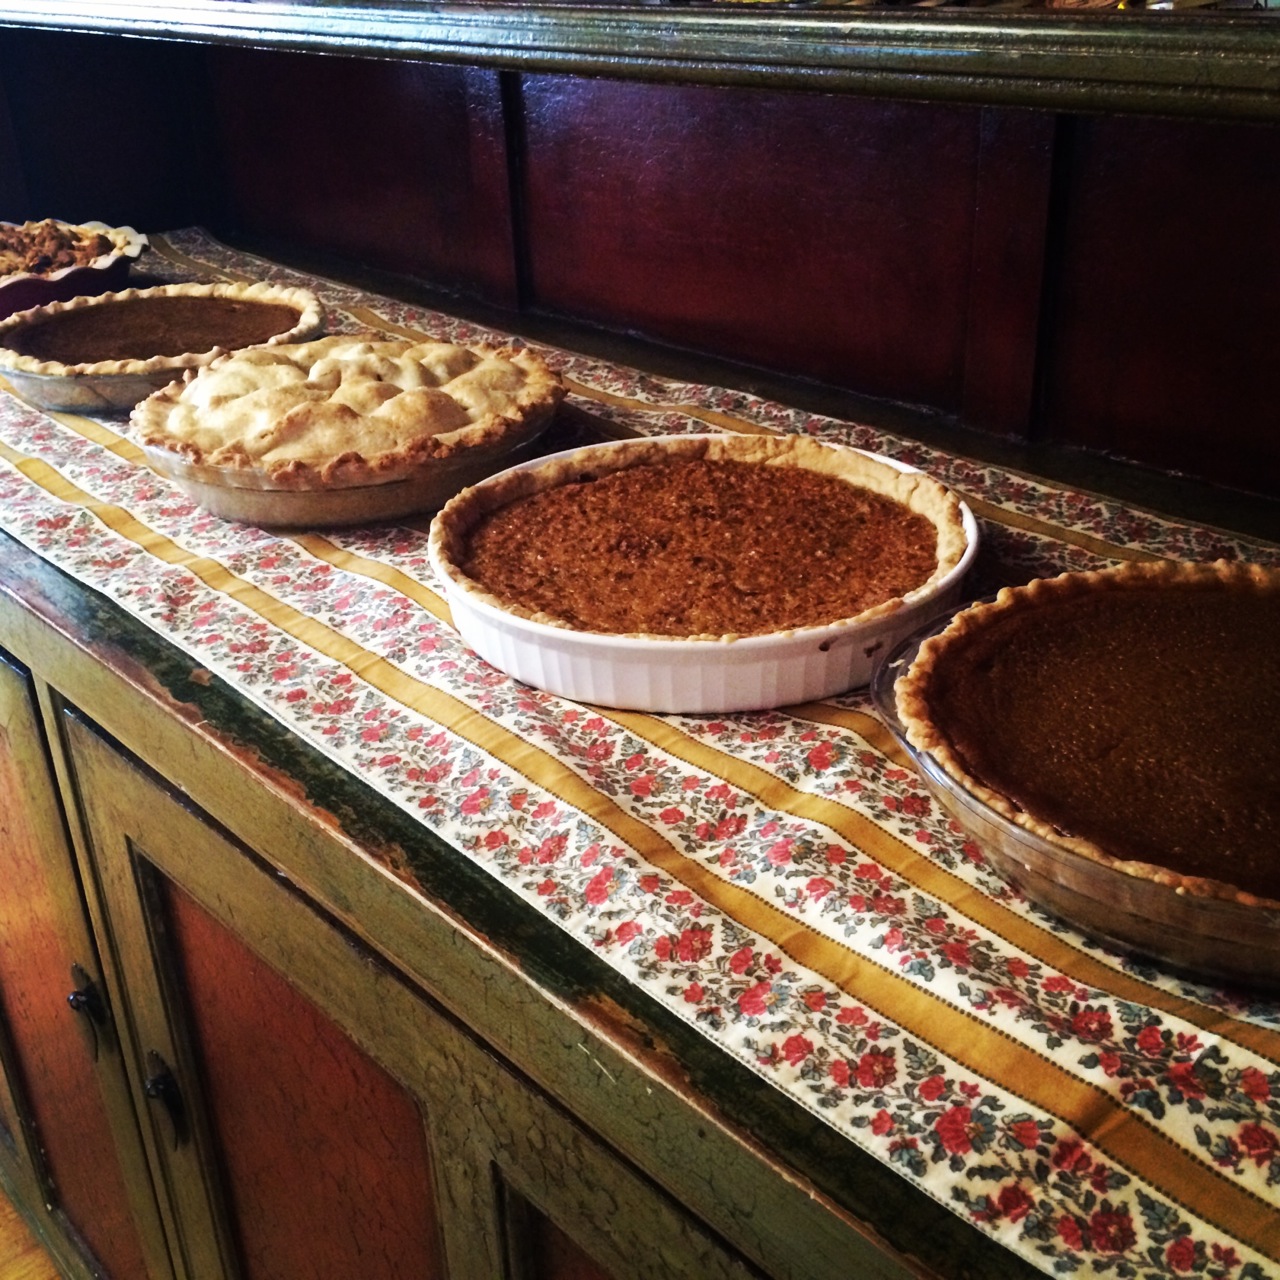 Pies (photo by Yvonne Condes)